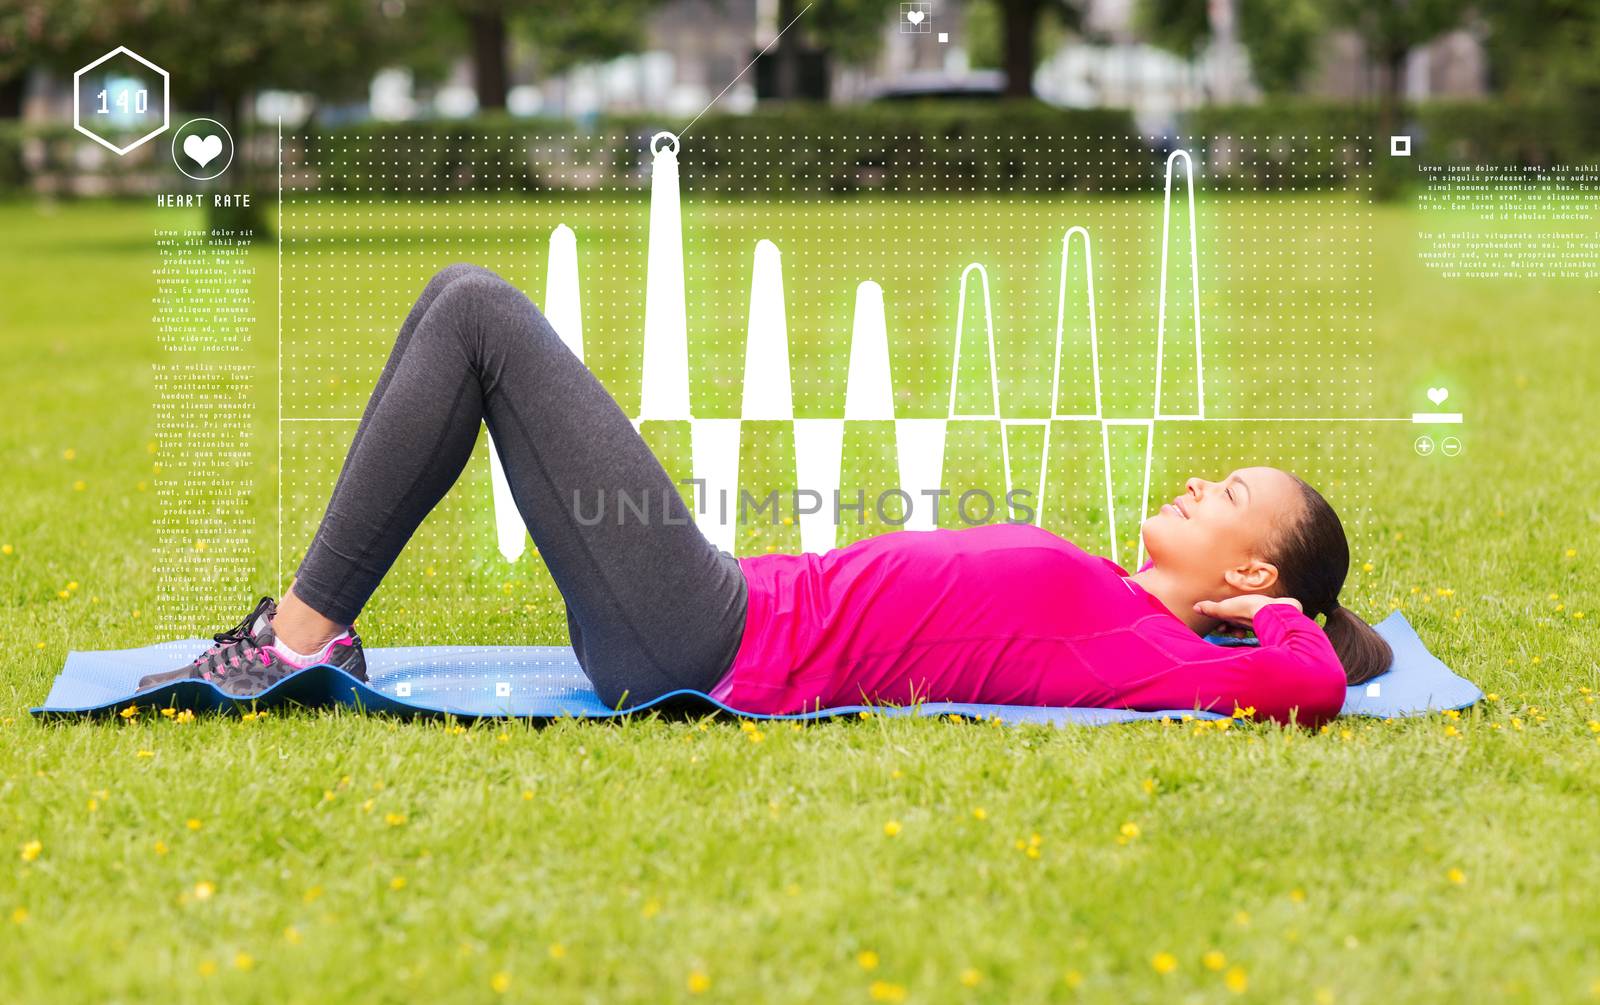 smiling woman doing exercises on mat outdoors by dolgachov